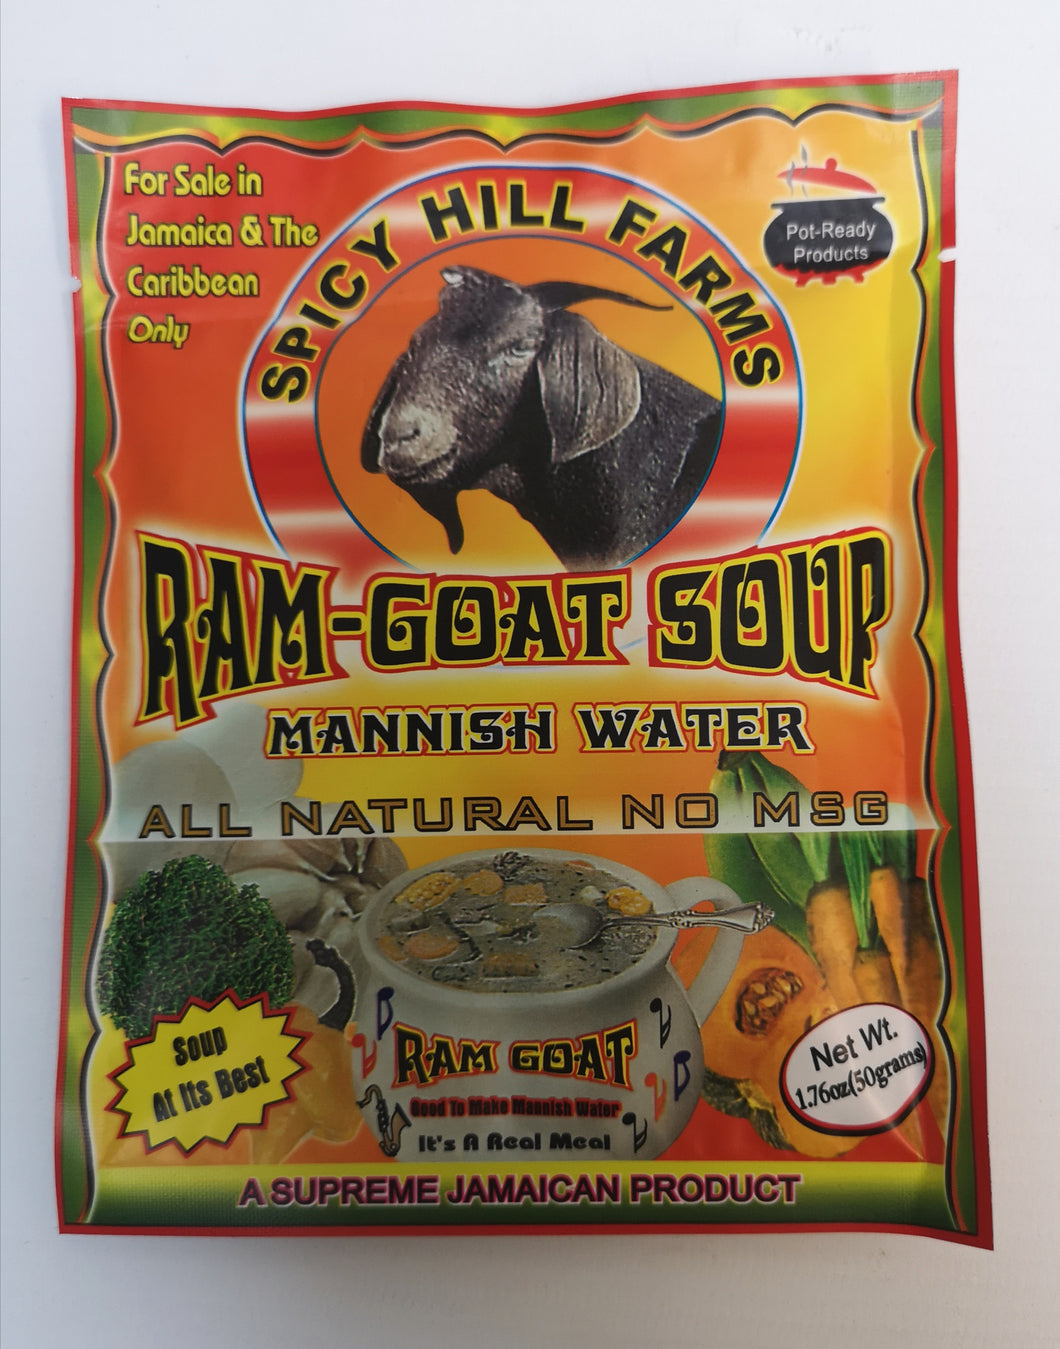 Spicy Hill Farms Ram-Goat Soup